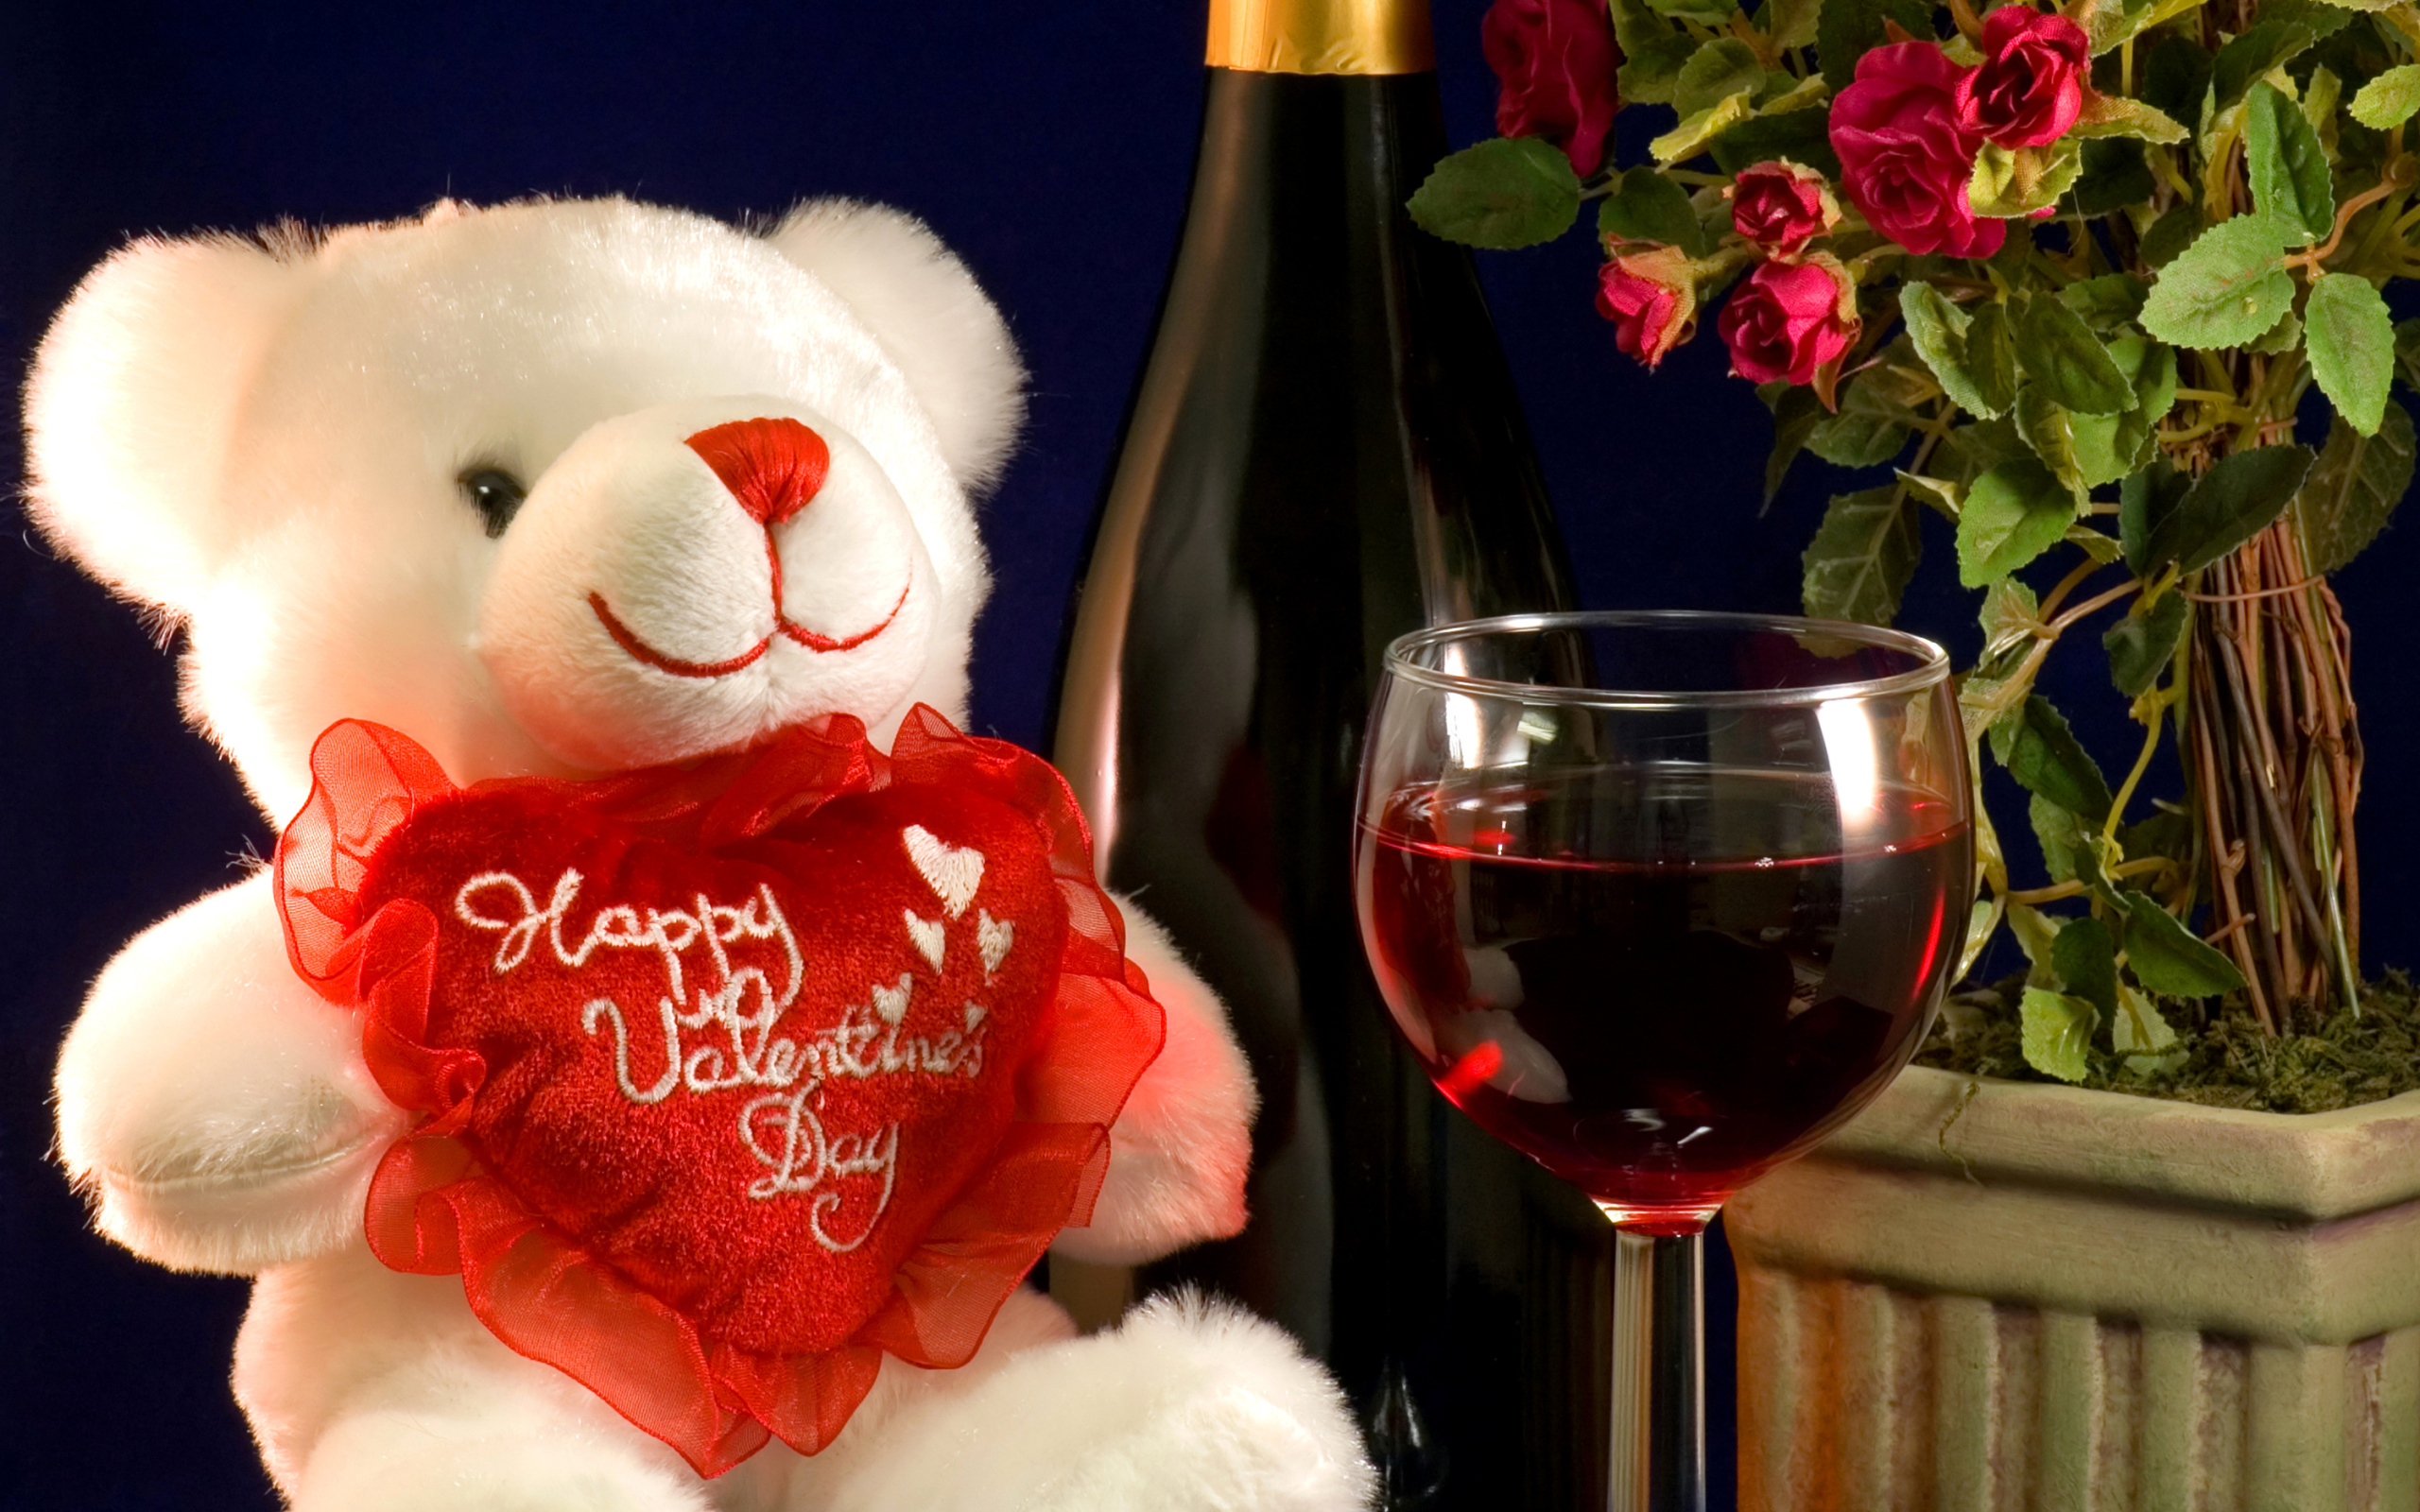 Teddy bear and red wine for Valentine's Day, February 14 Desktop wallpaper 2560x1600